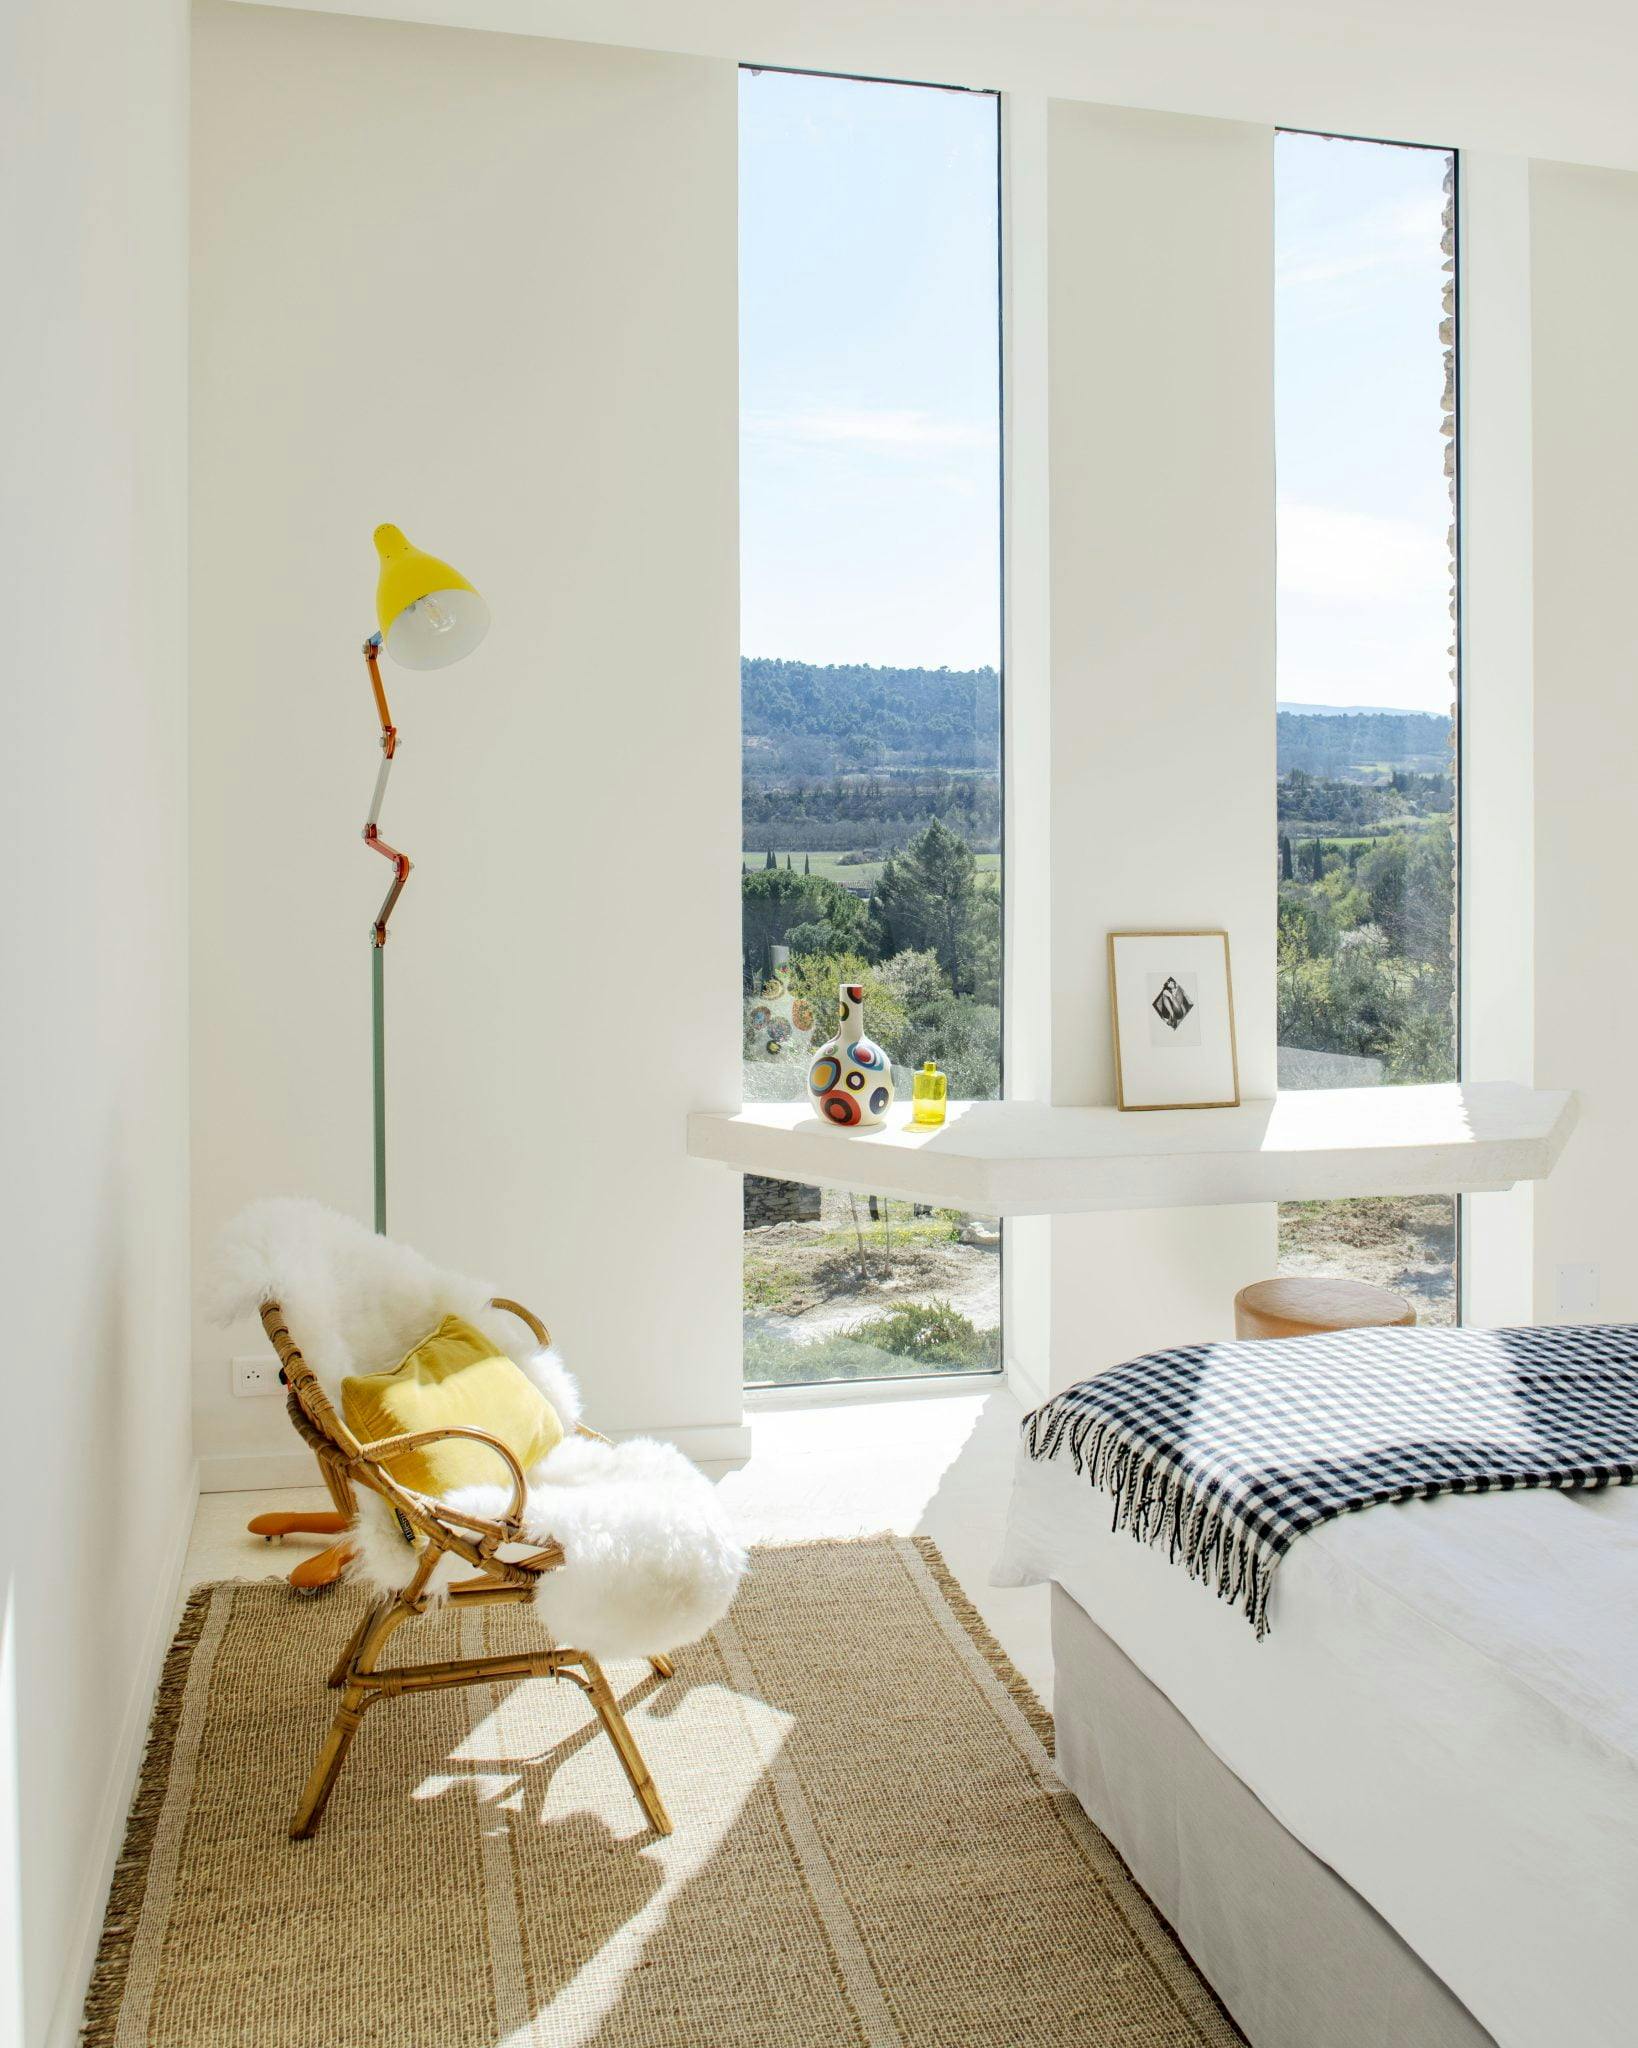 View on nature from one of the 70s inspired decorated room in the Atelier of Les Milles Roches